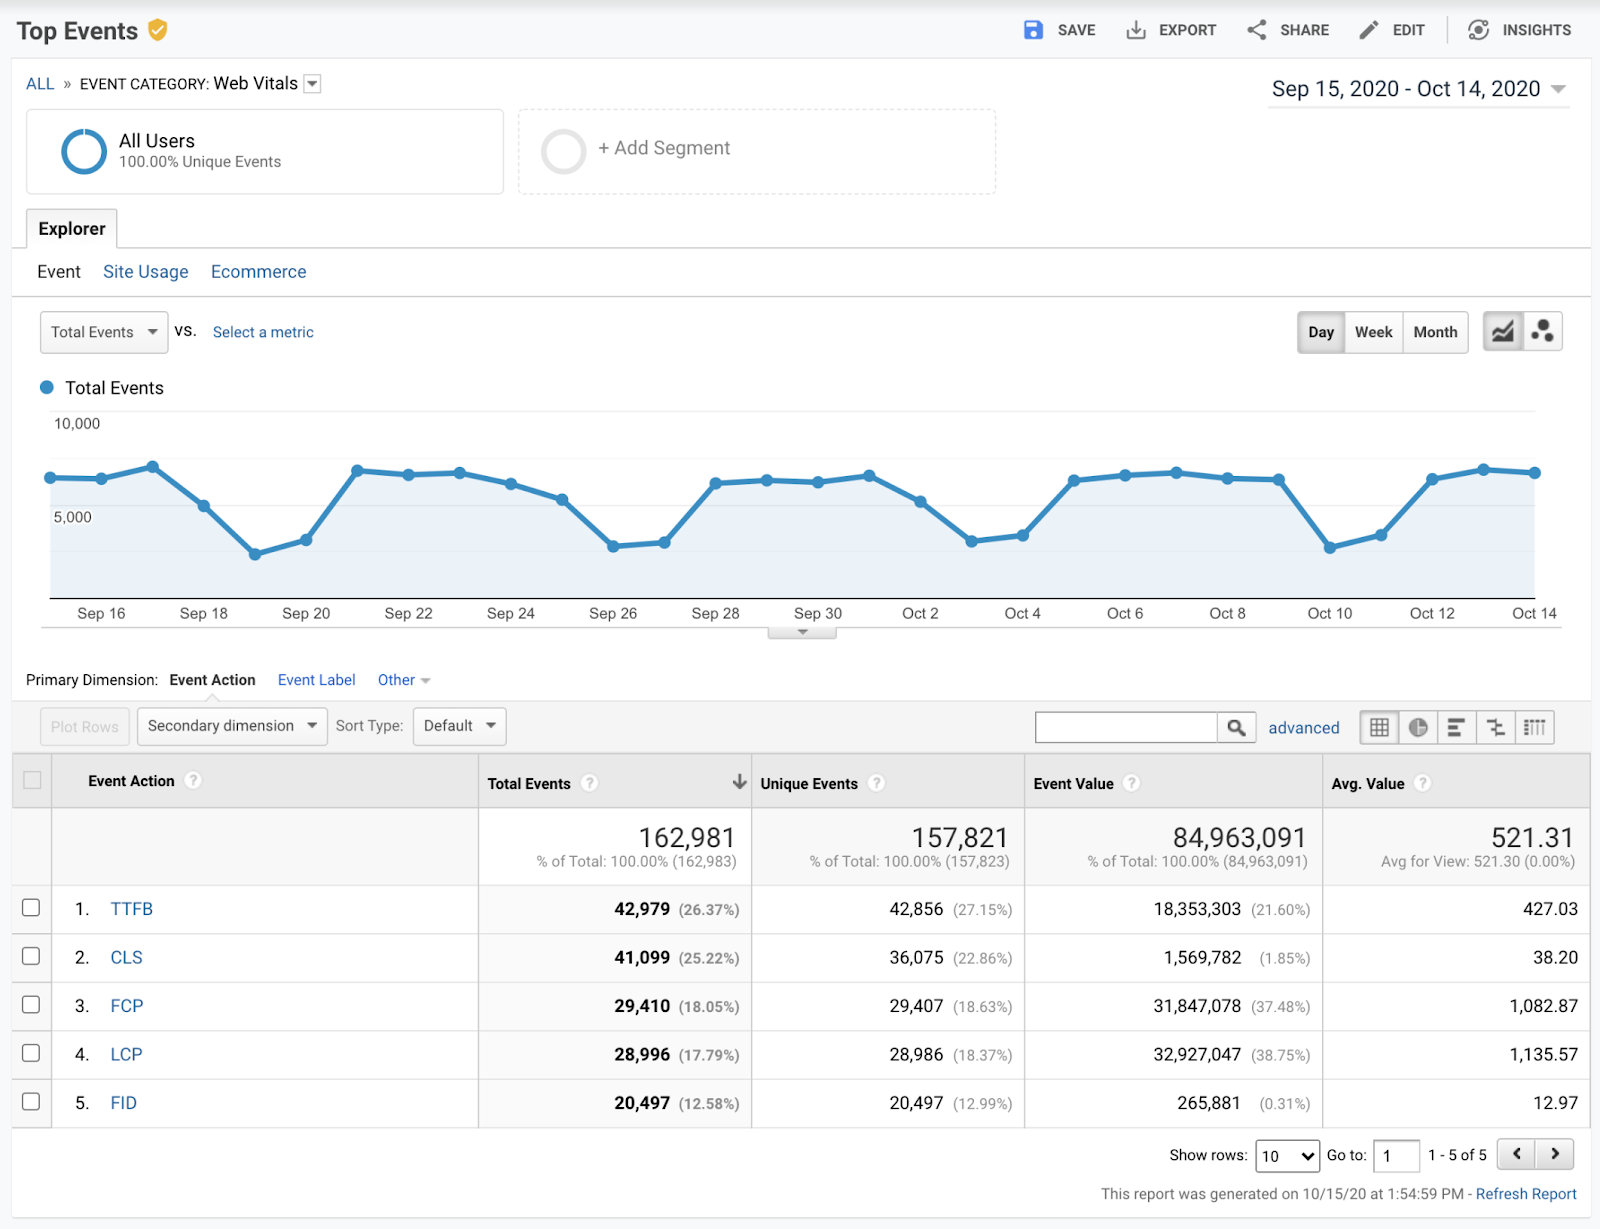 The Top Events report in Google Analytics